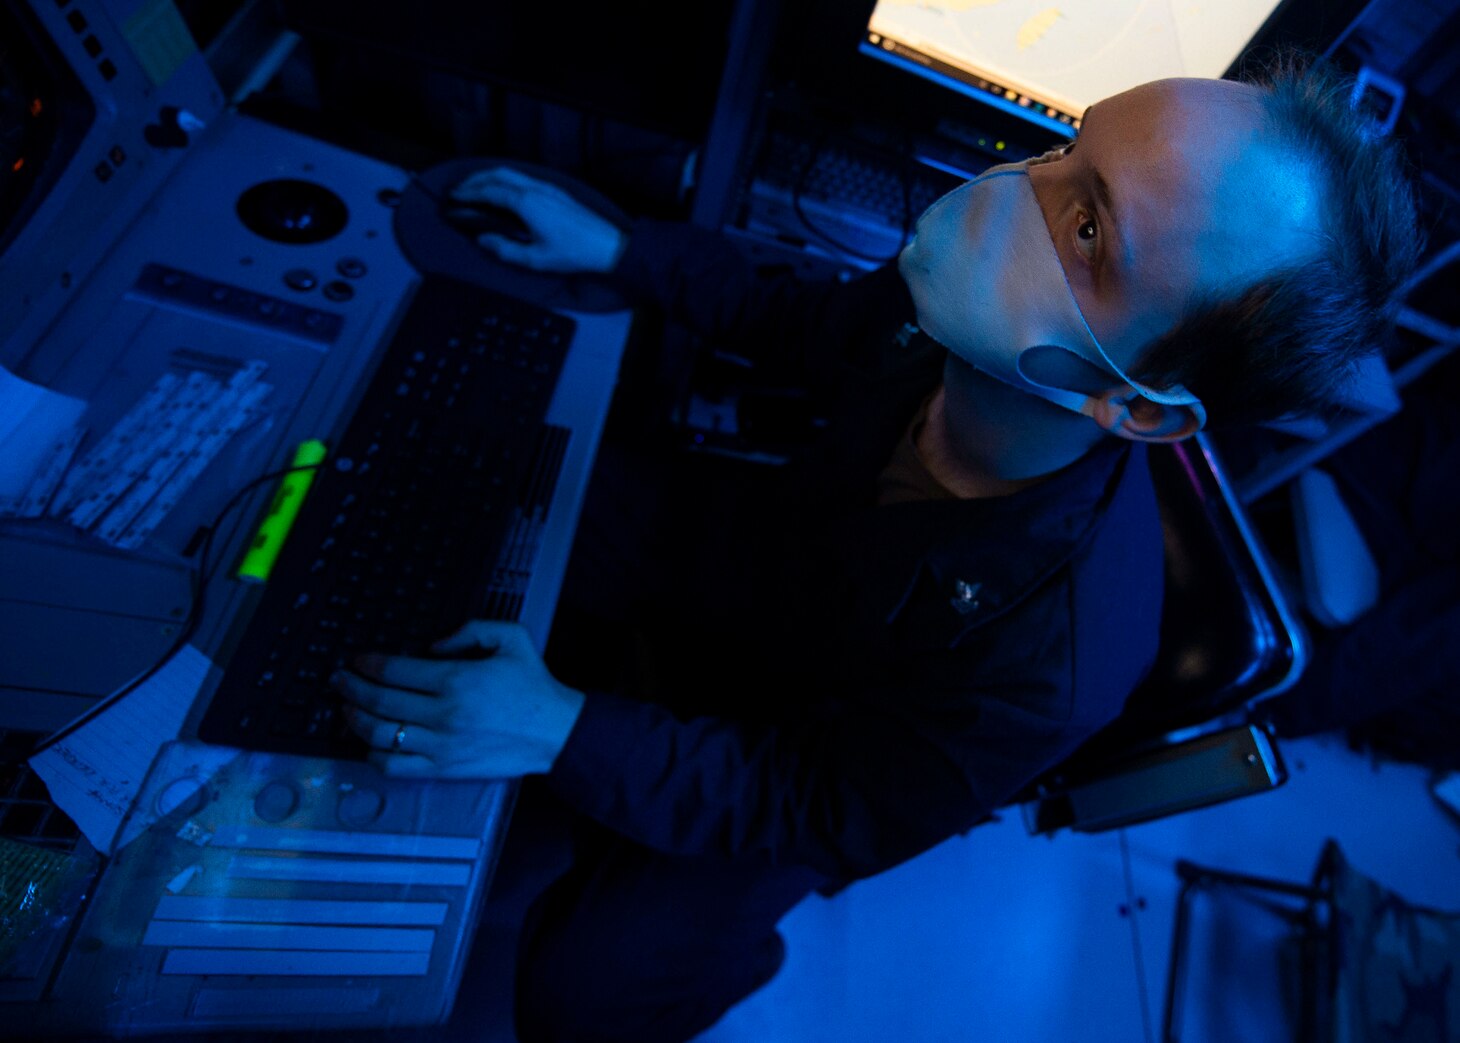 TAIWAN STRAIT (Dec. 30, 2020) Cryptologic Technician (technical) 2nd Class Christian PriceGlunz, from Littleton, Colorado, operates a console in the combat information center as guided-missile destroyer USS Curtis Wilbur (DDG 54) conducts routine operations. Curtis Wilbur is forward-deployed to the U.S. 7th Fleet area of operations in support of a free and open Indo-Pacific.